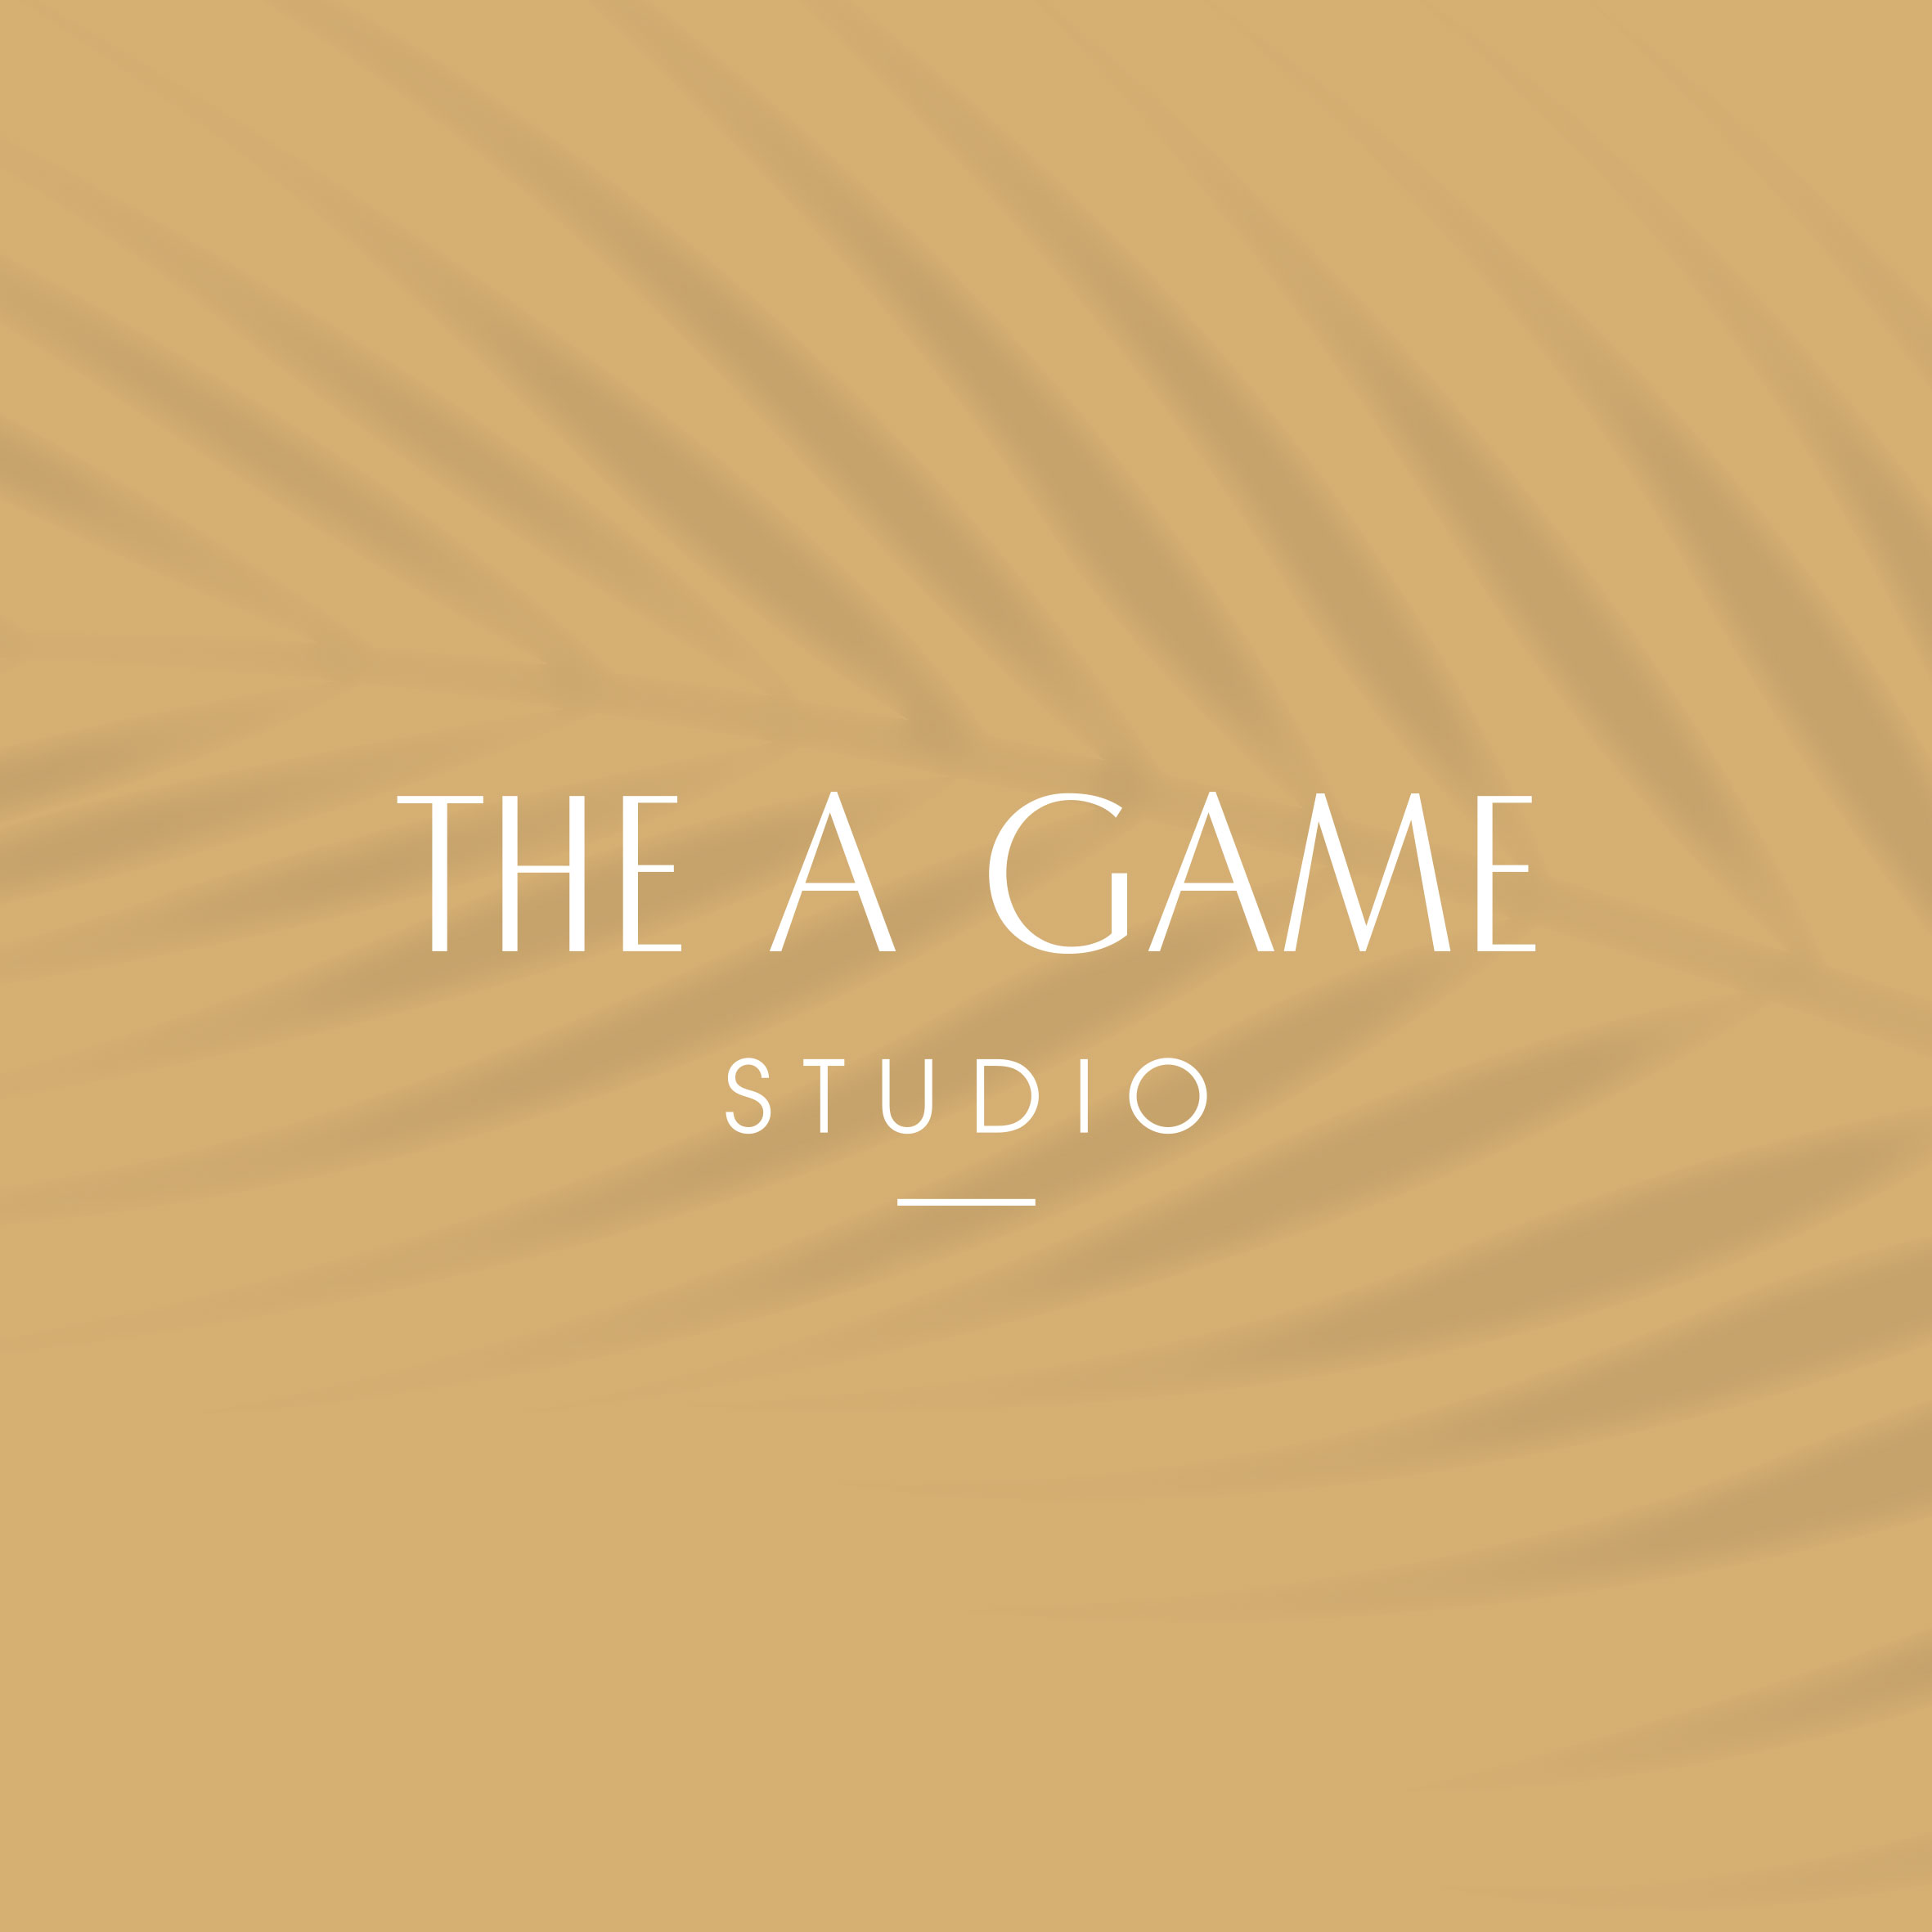 The A Game Studio